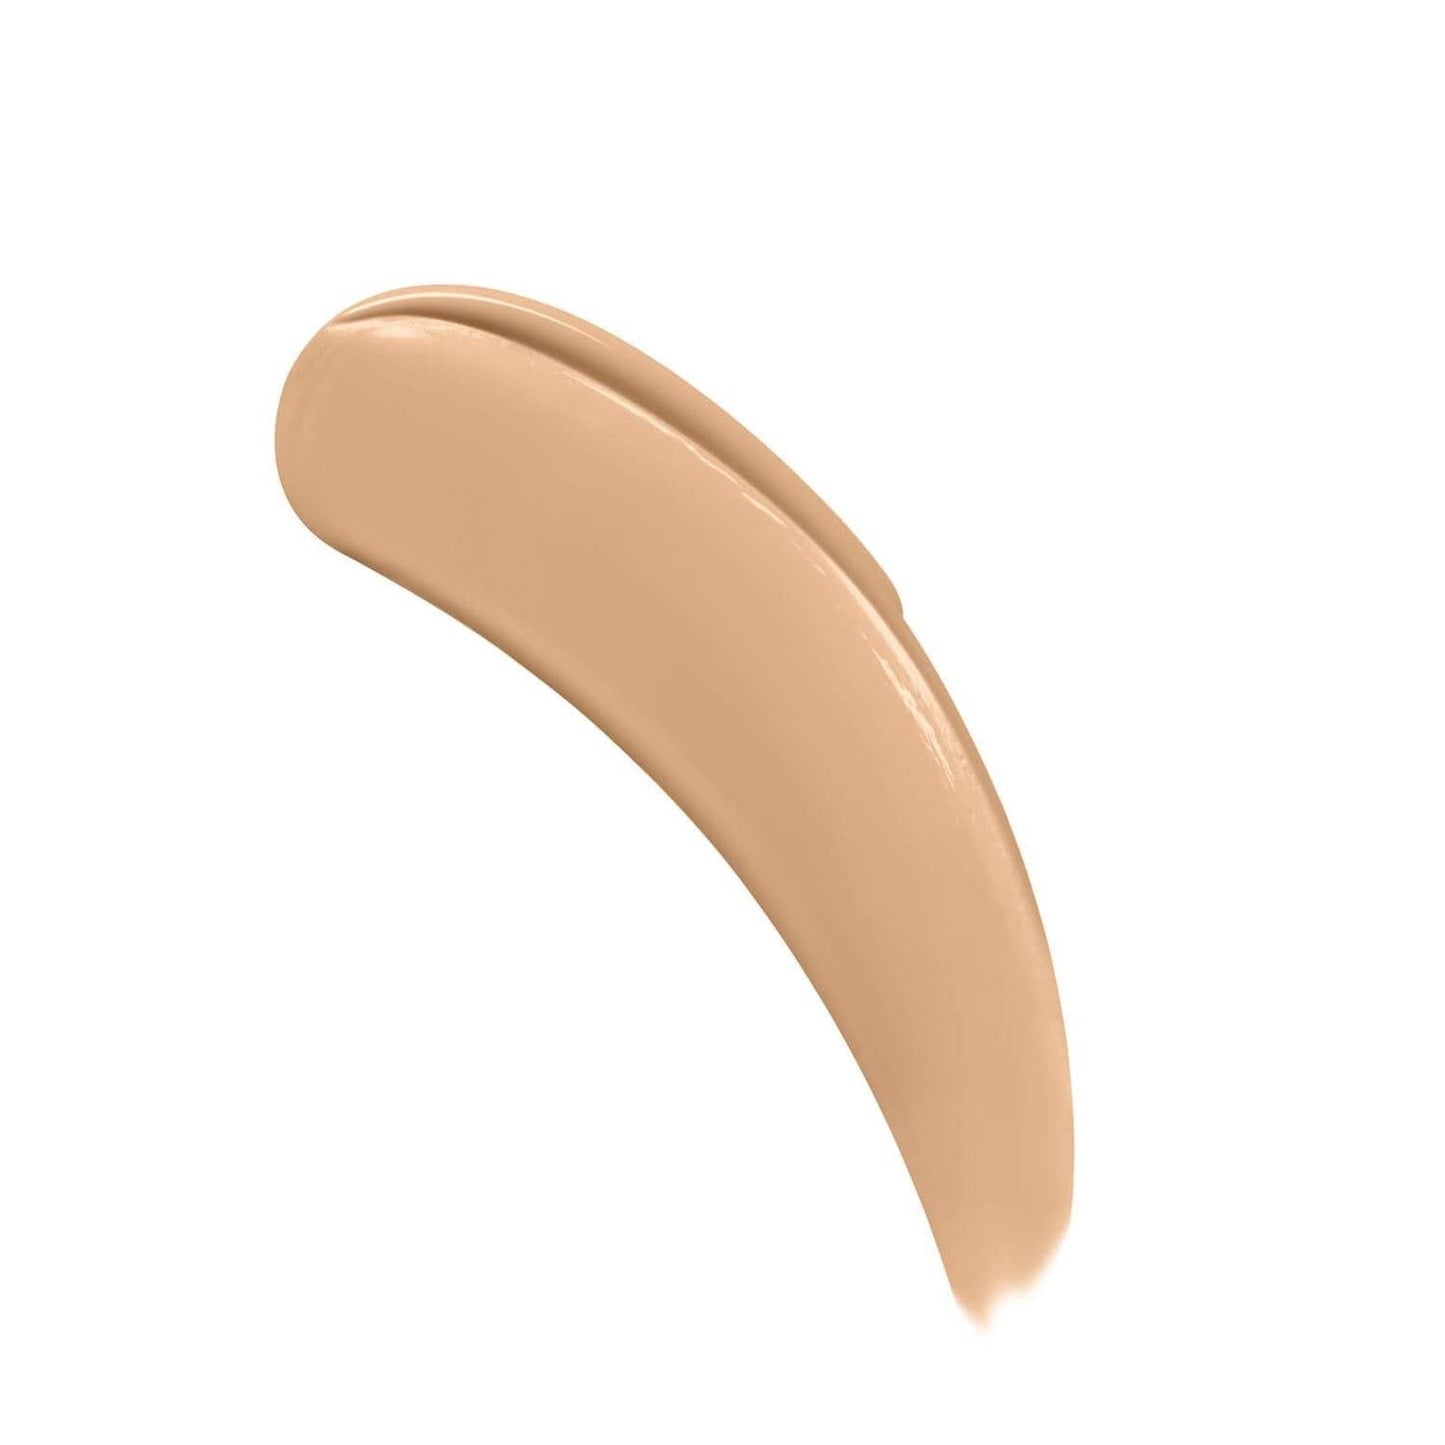 IT COSMETICS Beauty IT Cosmetics Your Skin But Better Foundation and Skincare 30ml - 31 Medium Neutral